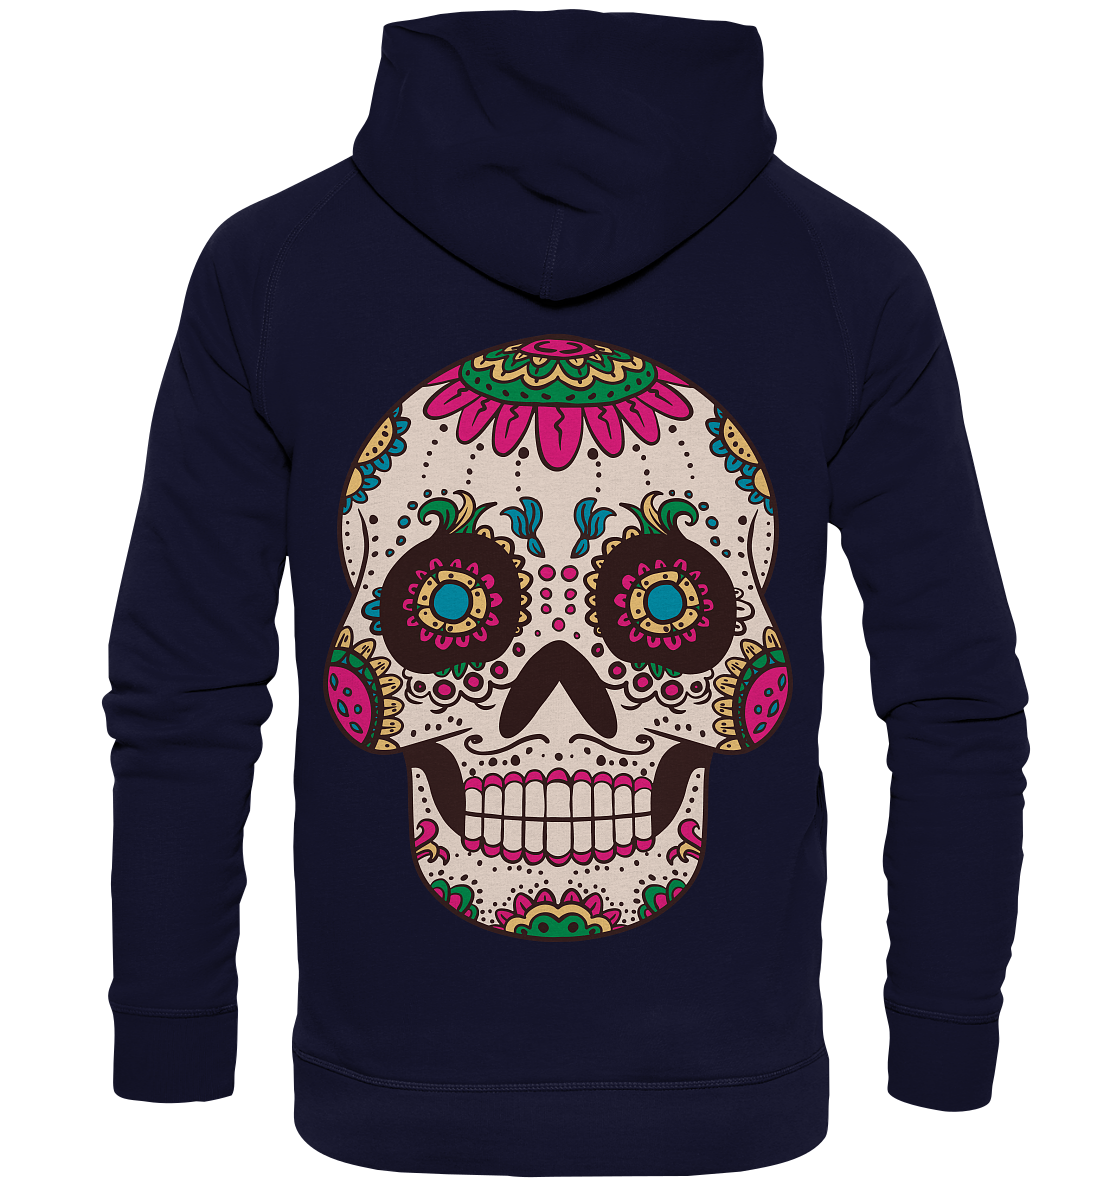 Skull Mouthcover Totenschädel Totenkopf  - Basic Unisex Hoodie XL